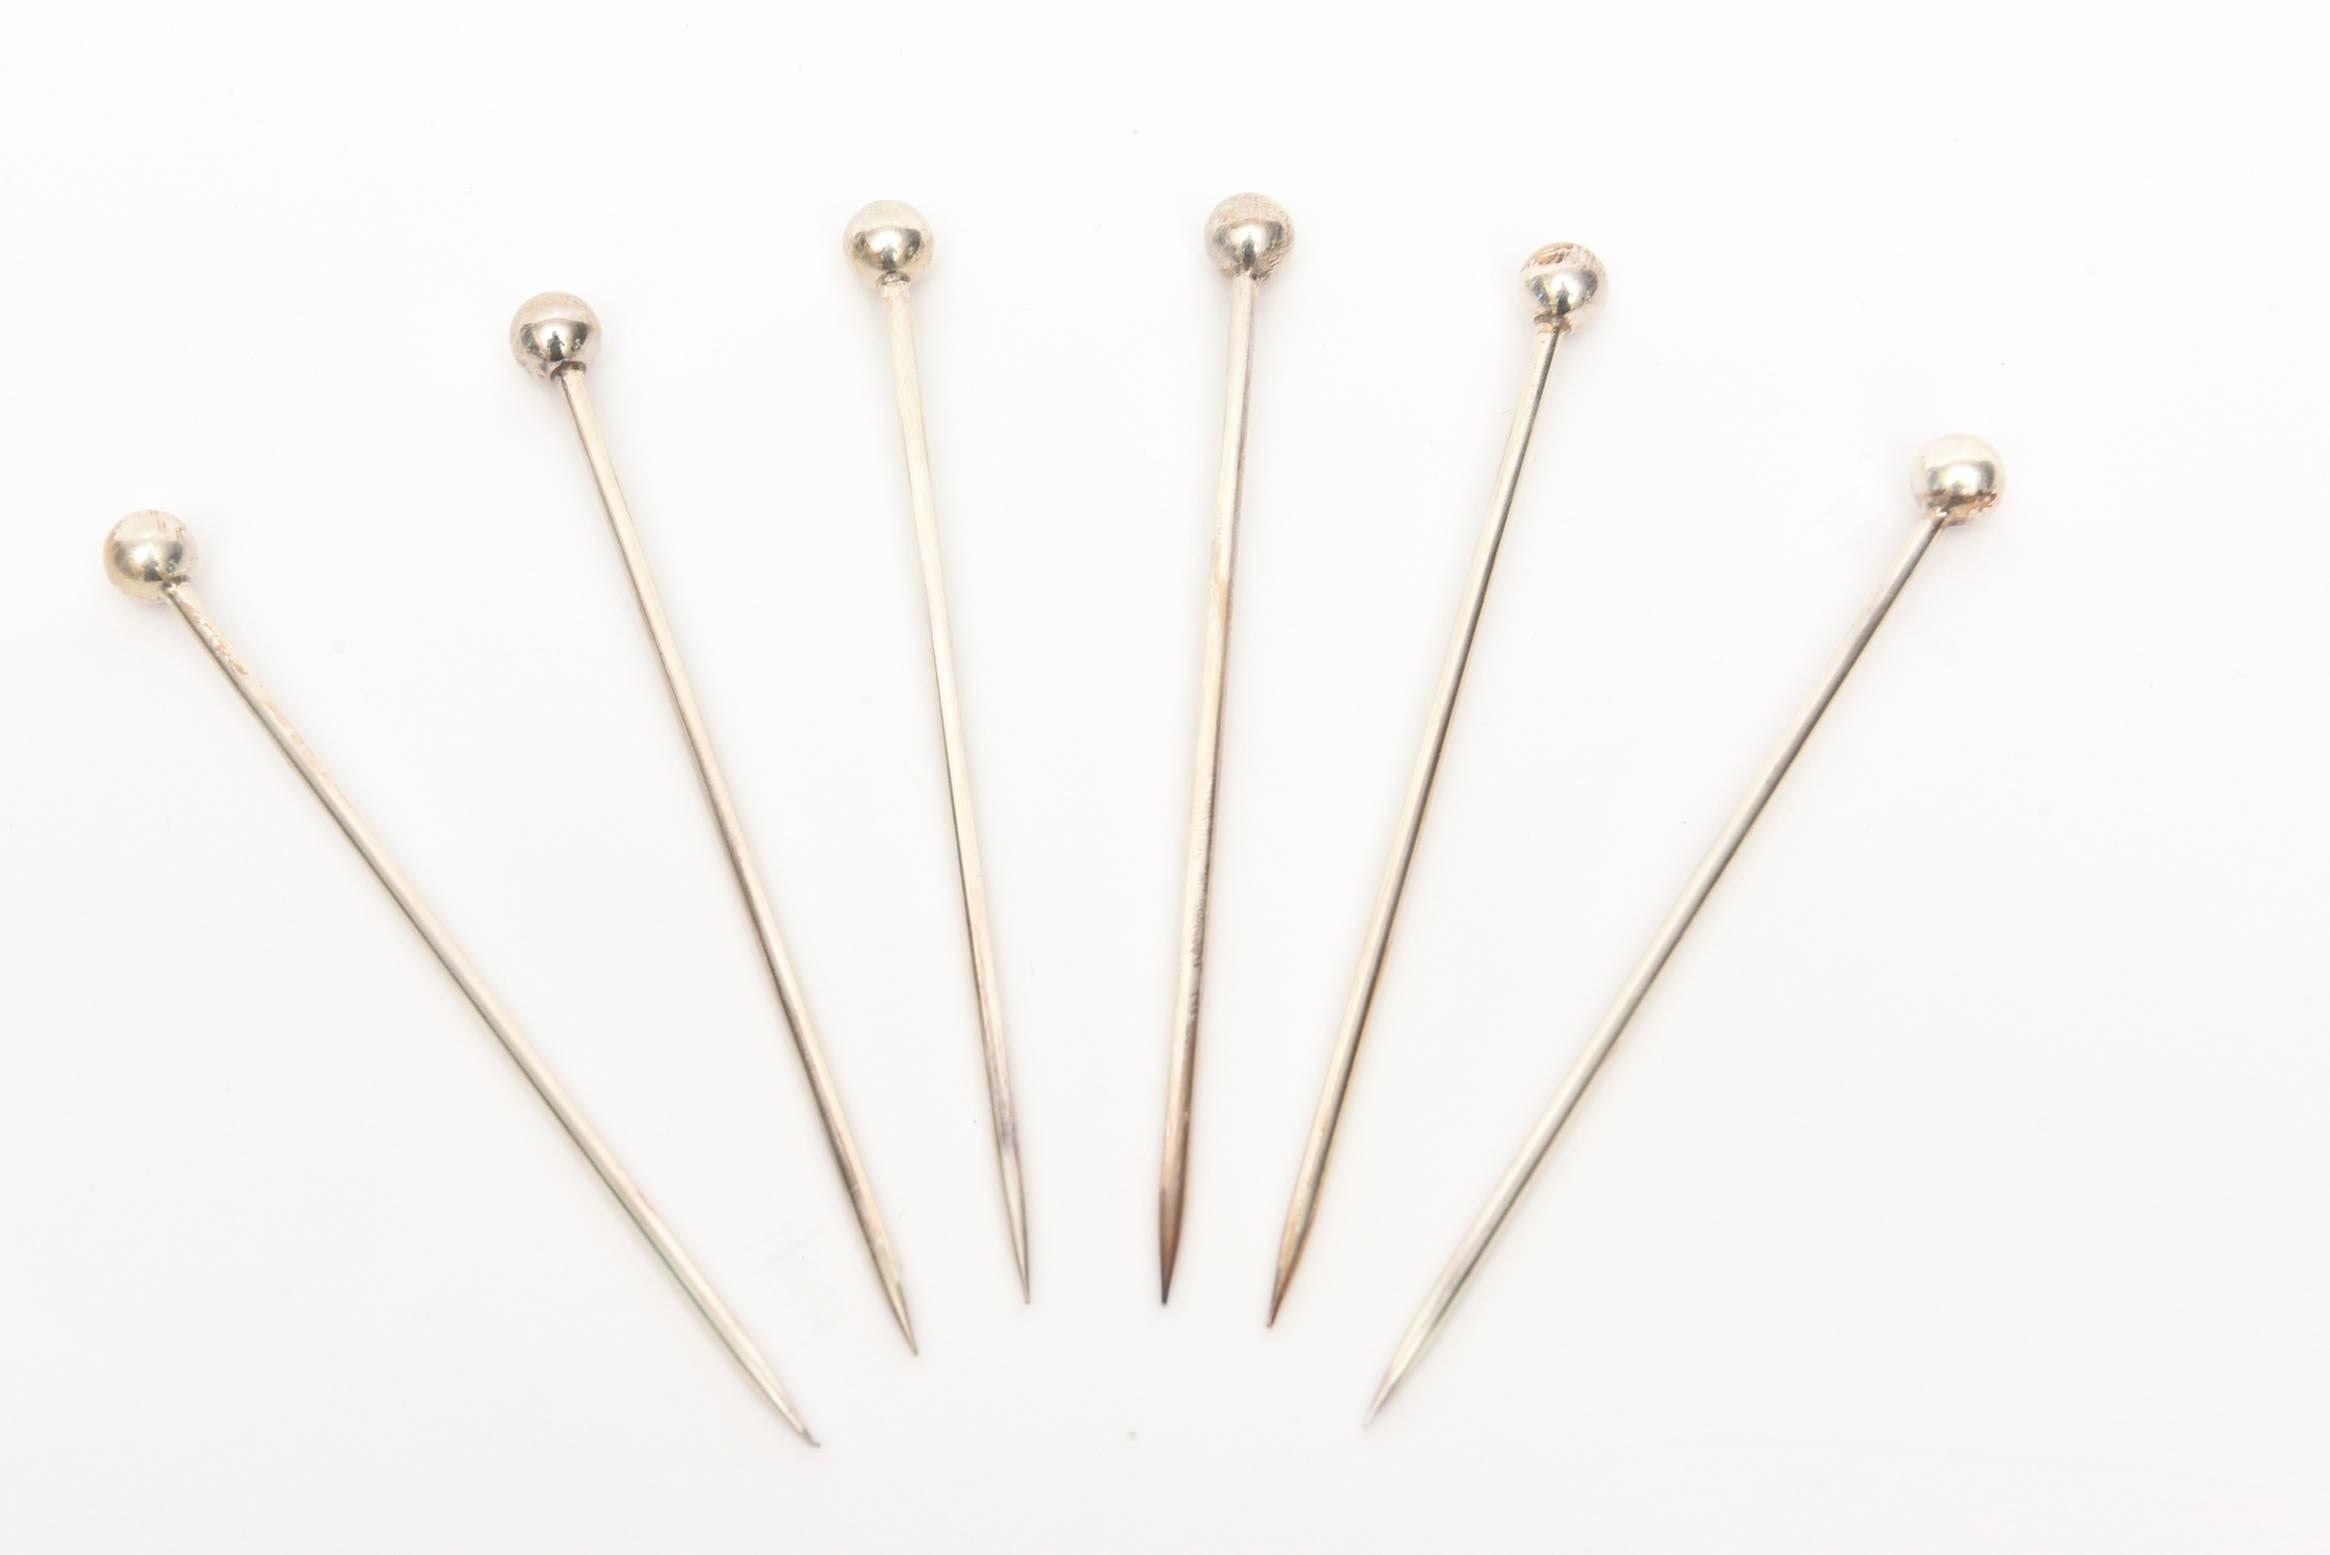 These set of six vintage silver plate chic modern sculptural long serving picks or cocktail picks have their own original box which is quite elegant. Their tipped silver balls add easiness in picking up for serving. The company is Ercuis Paris